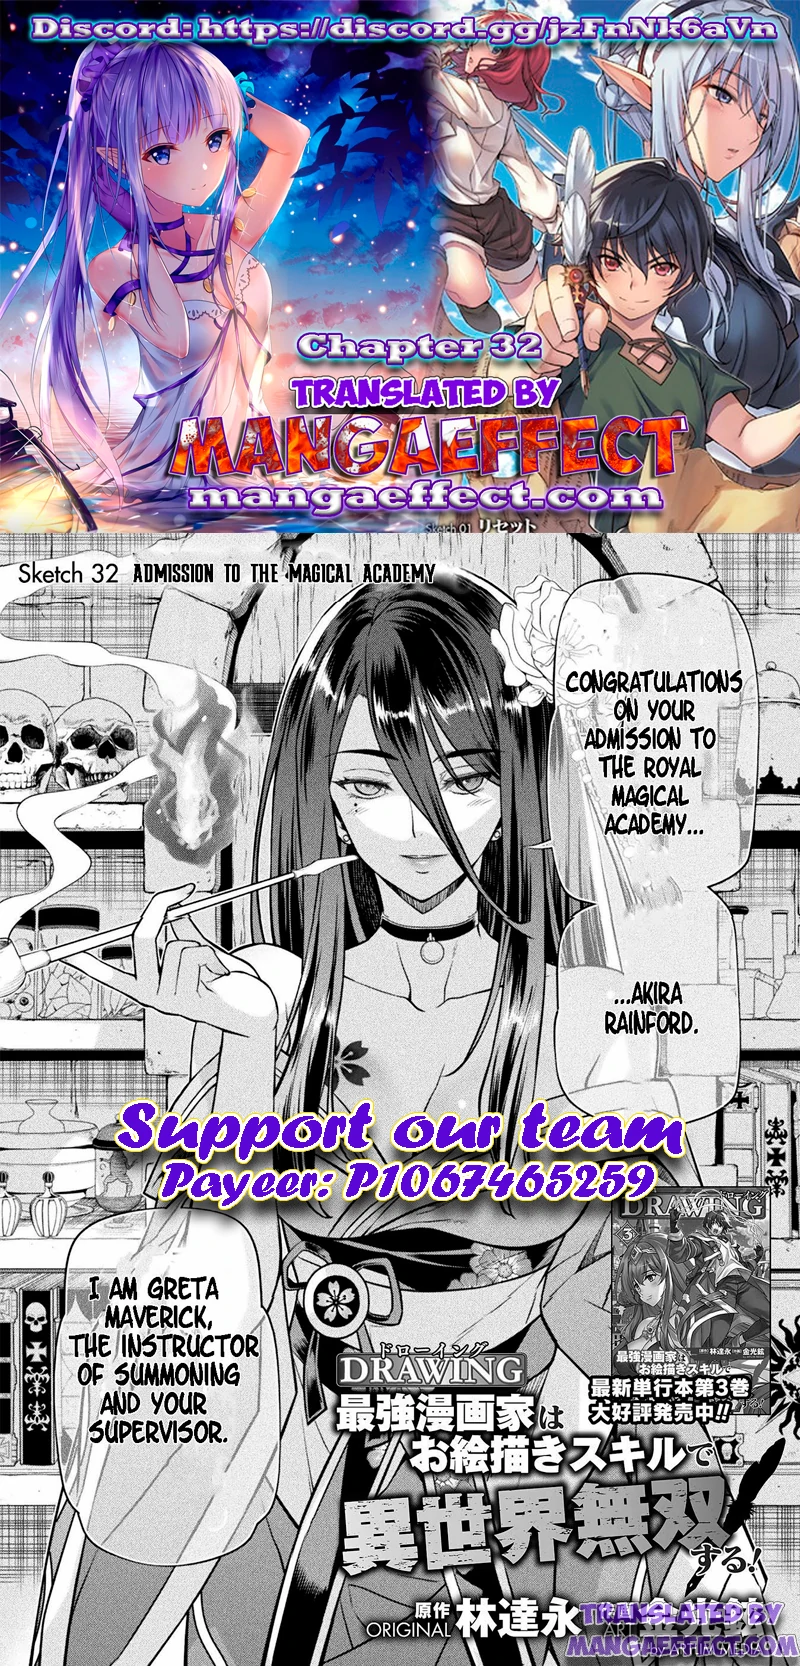 Drawing: The Greatest Mangaka Becomes A Skilled “Martial Artist” In Another World - Page 1